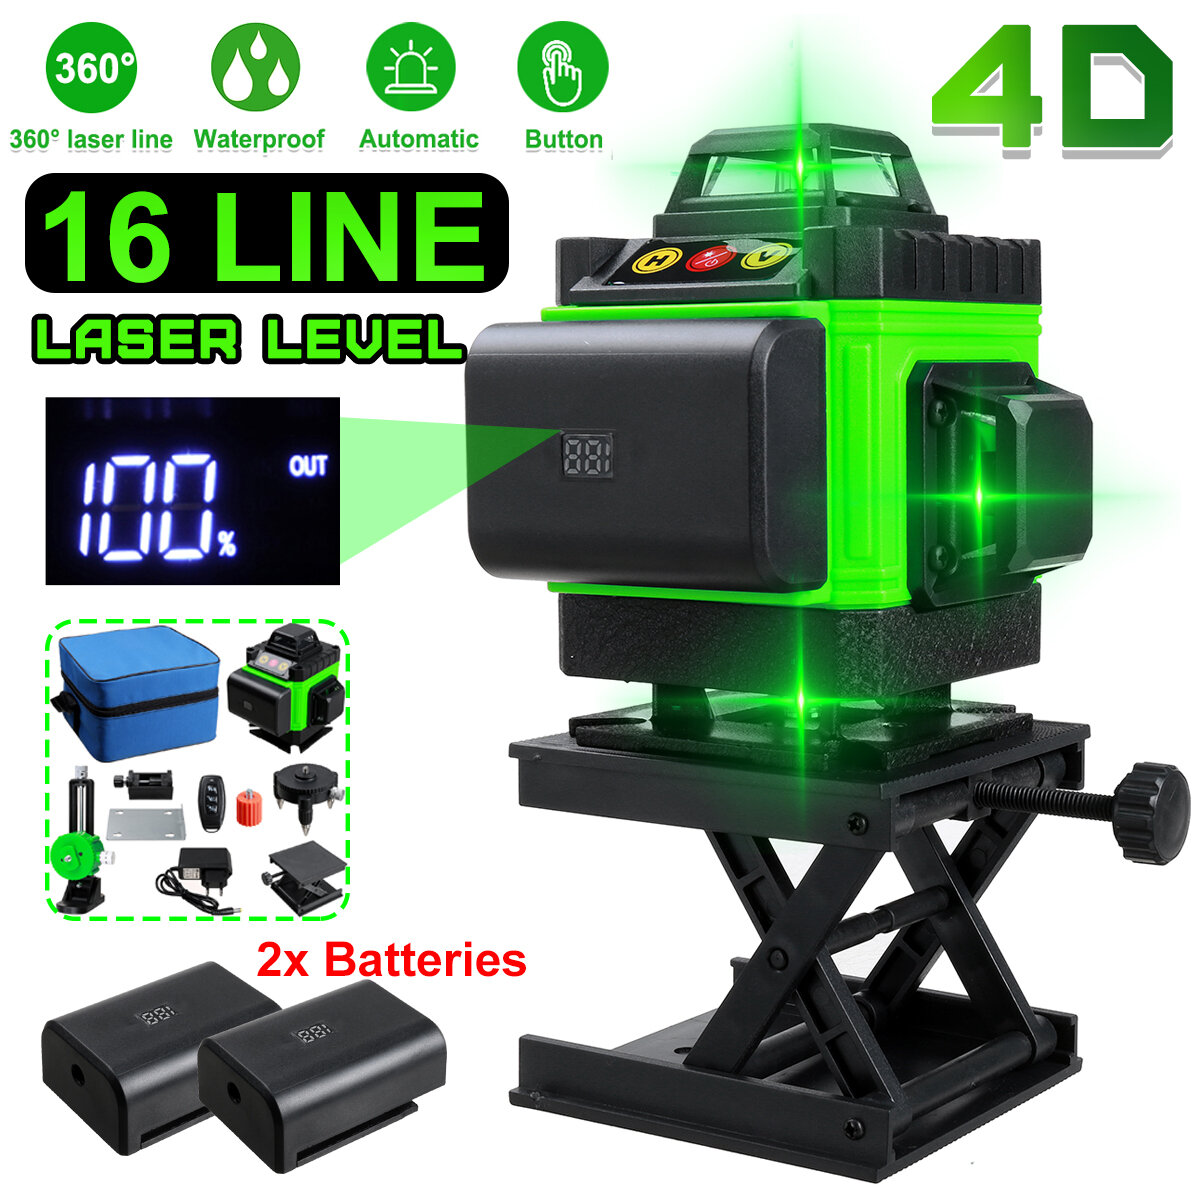 16 Lines 4D Laser Level, Green Laser Line, Self Leveling, Horizontal Lines &360 Degree Vertical Cross with 2xBattery for Outdoor